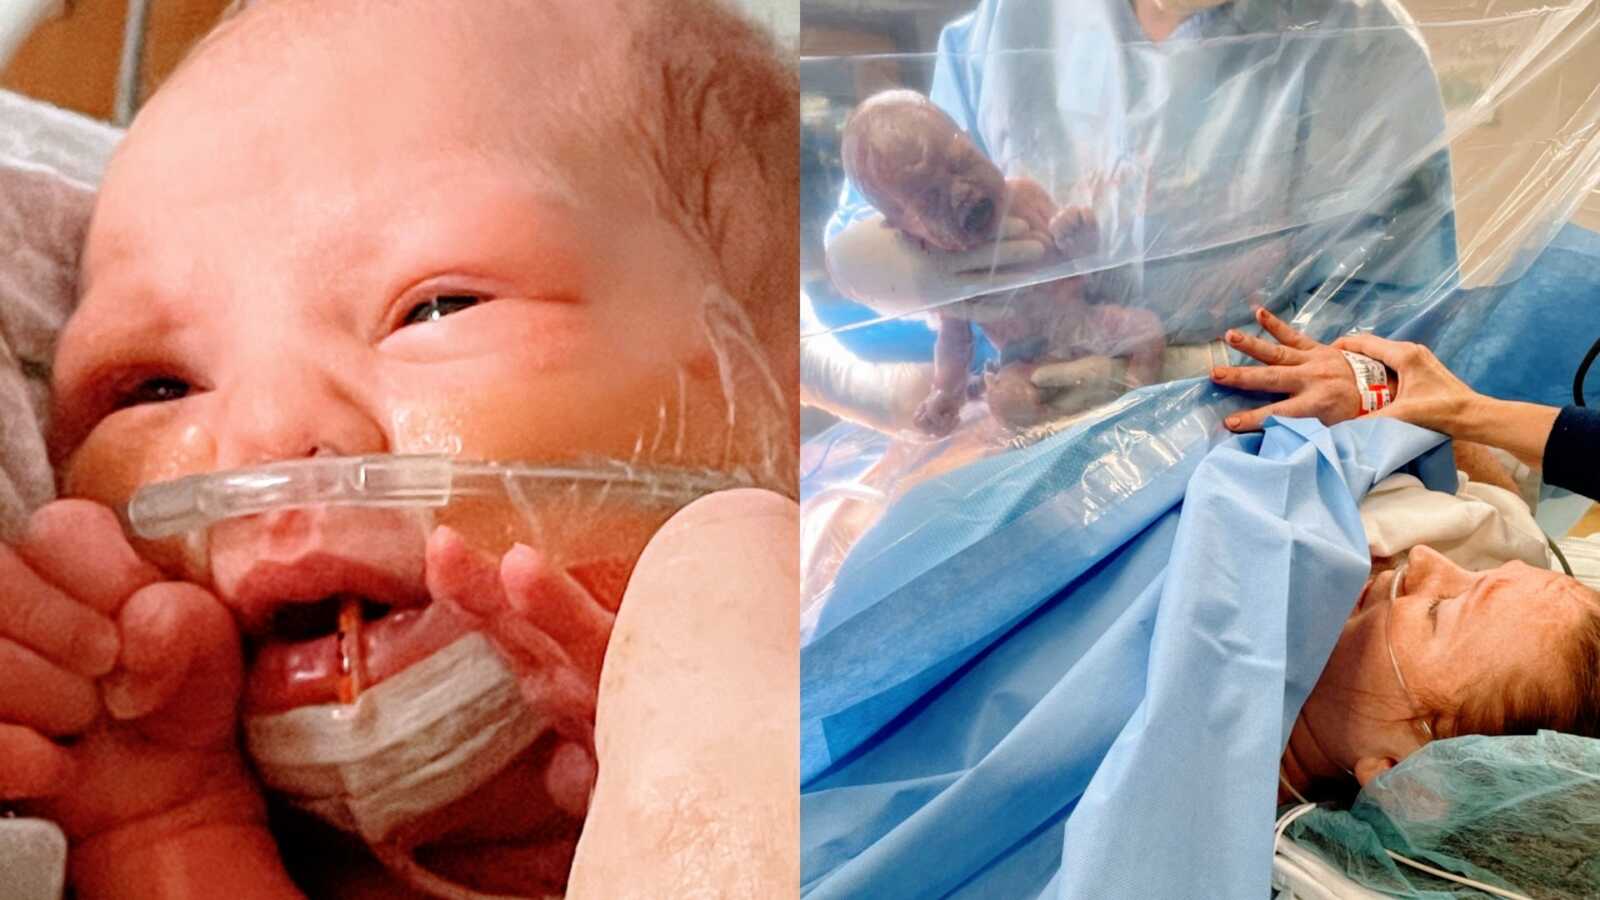 Mom delivers miracle baby after near death experience